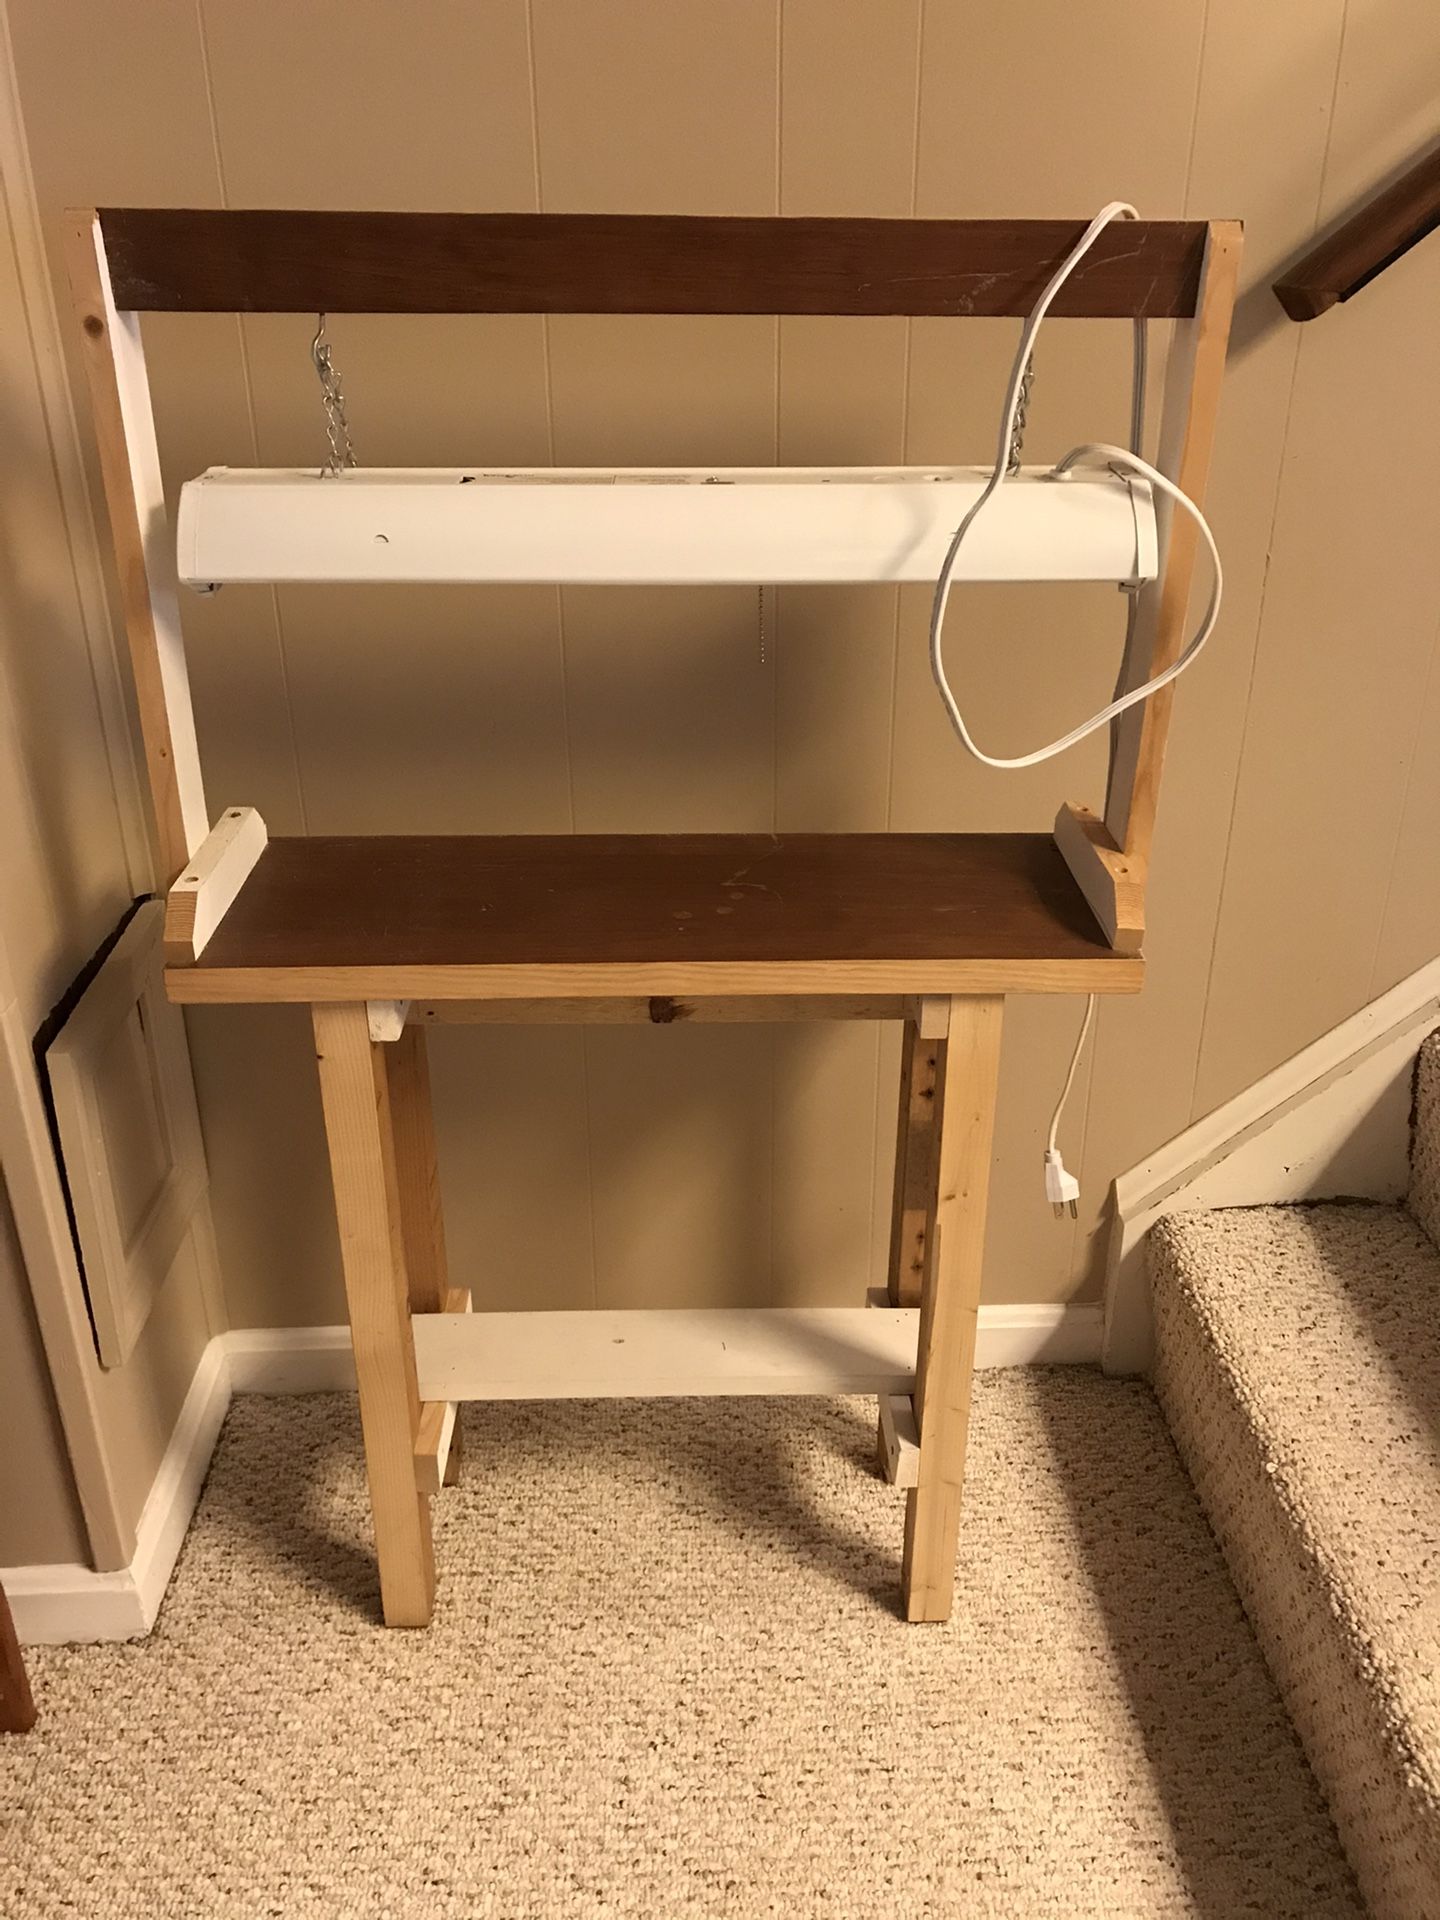 Light table for small plants or seeds